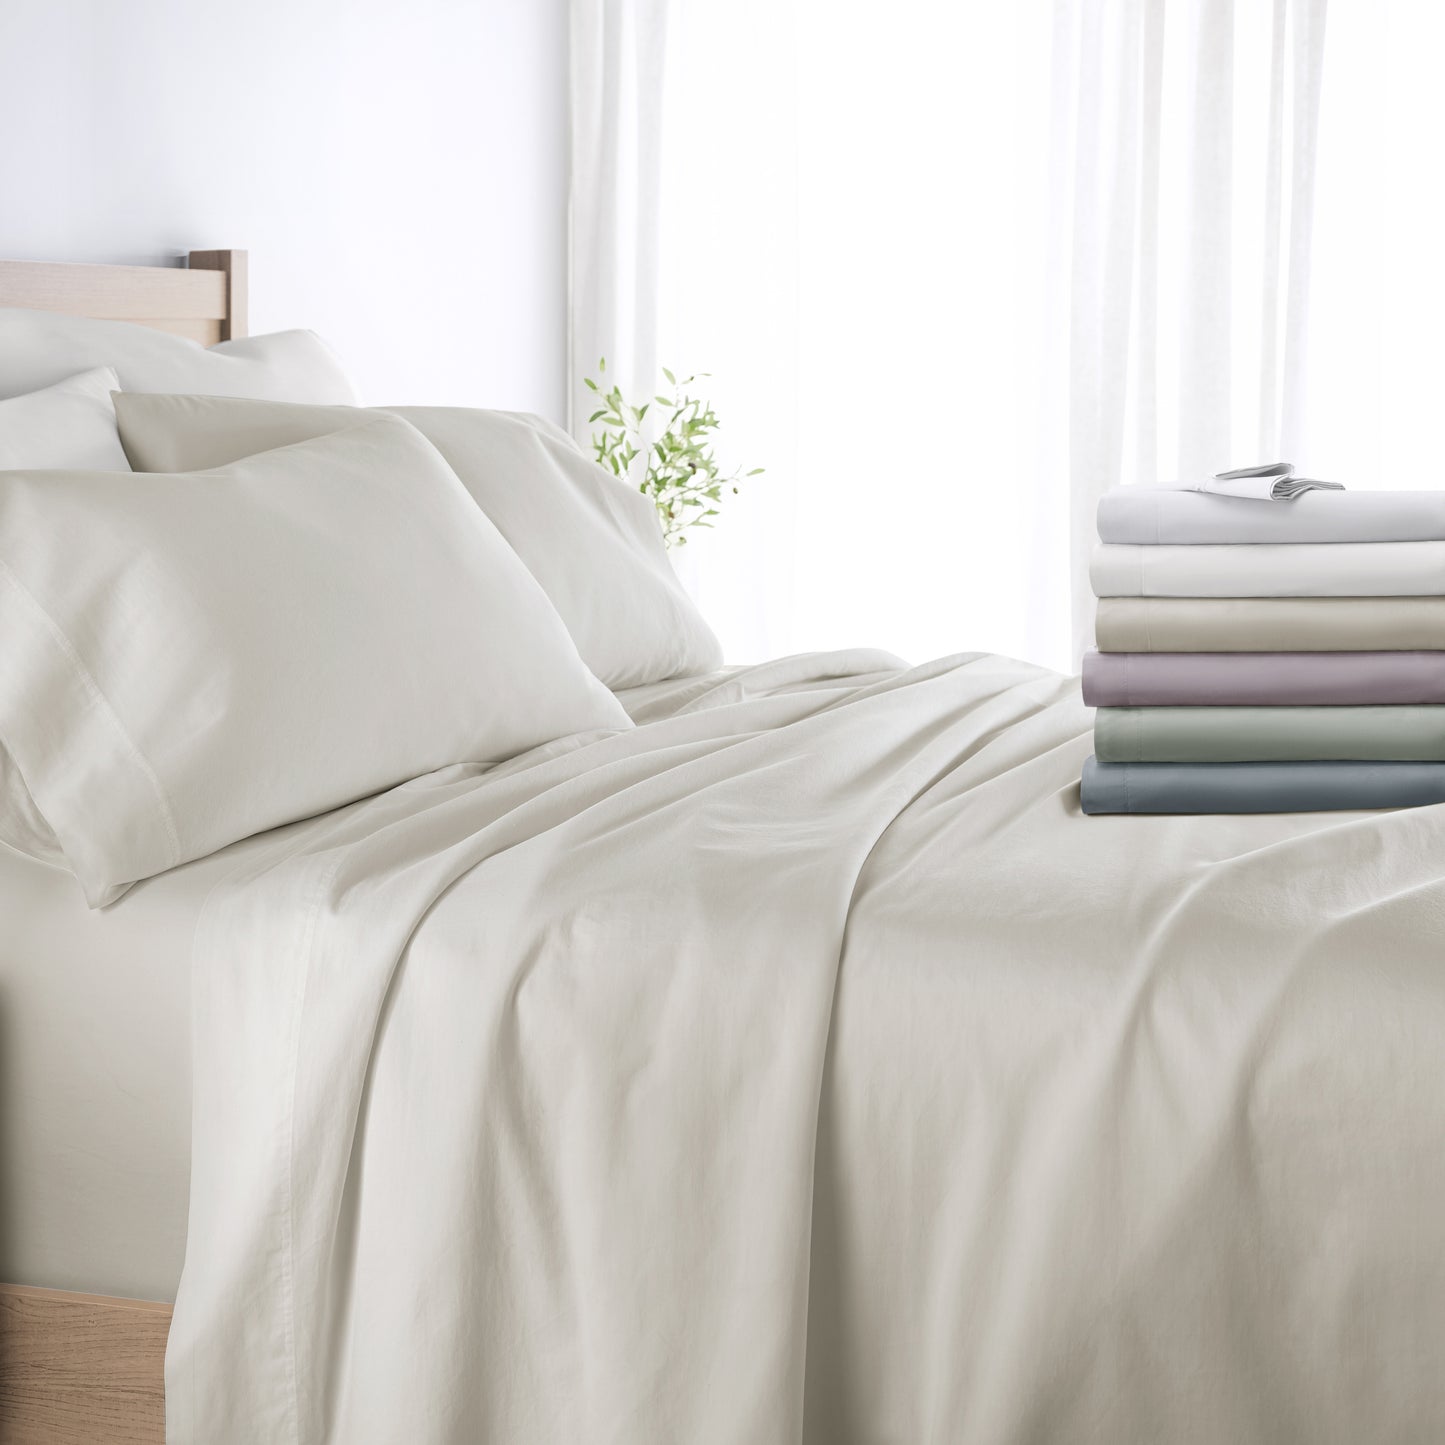 300 Thread Count Cotton Sheet Sets in Solid Colors